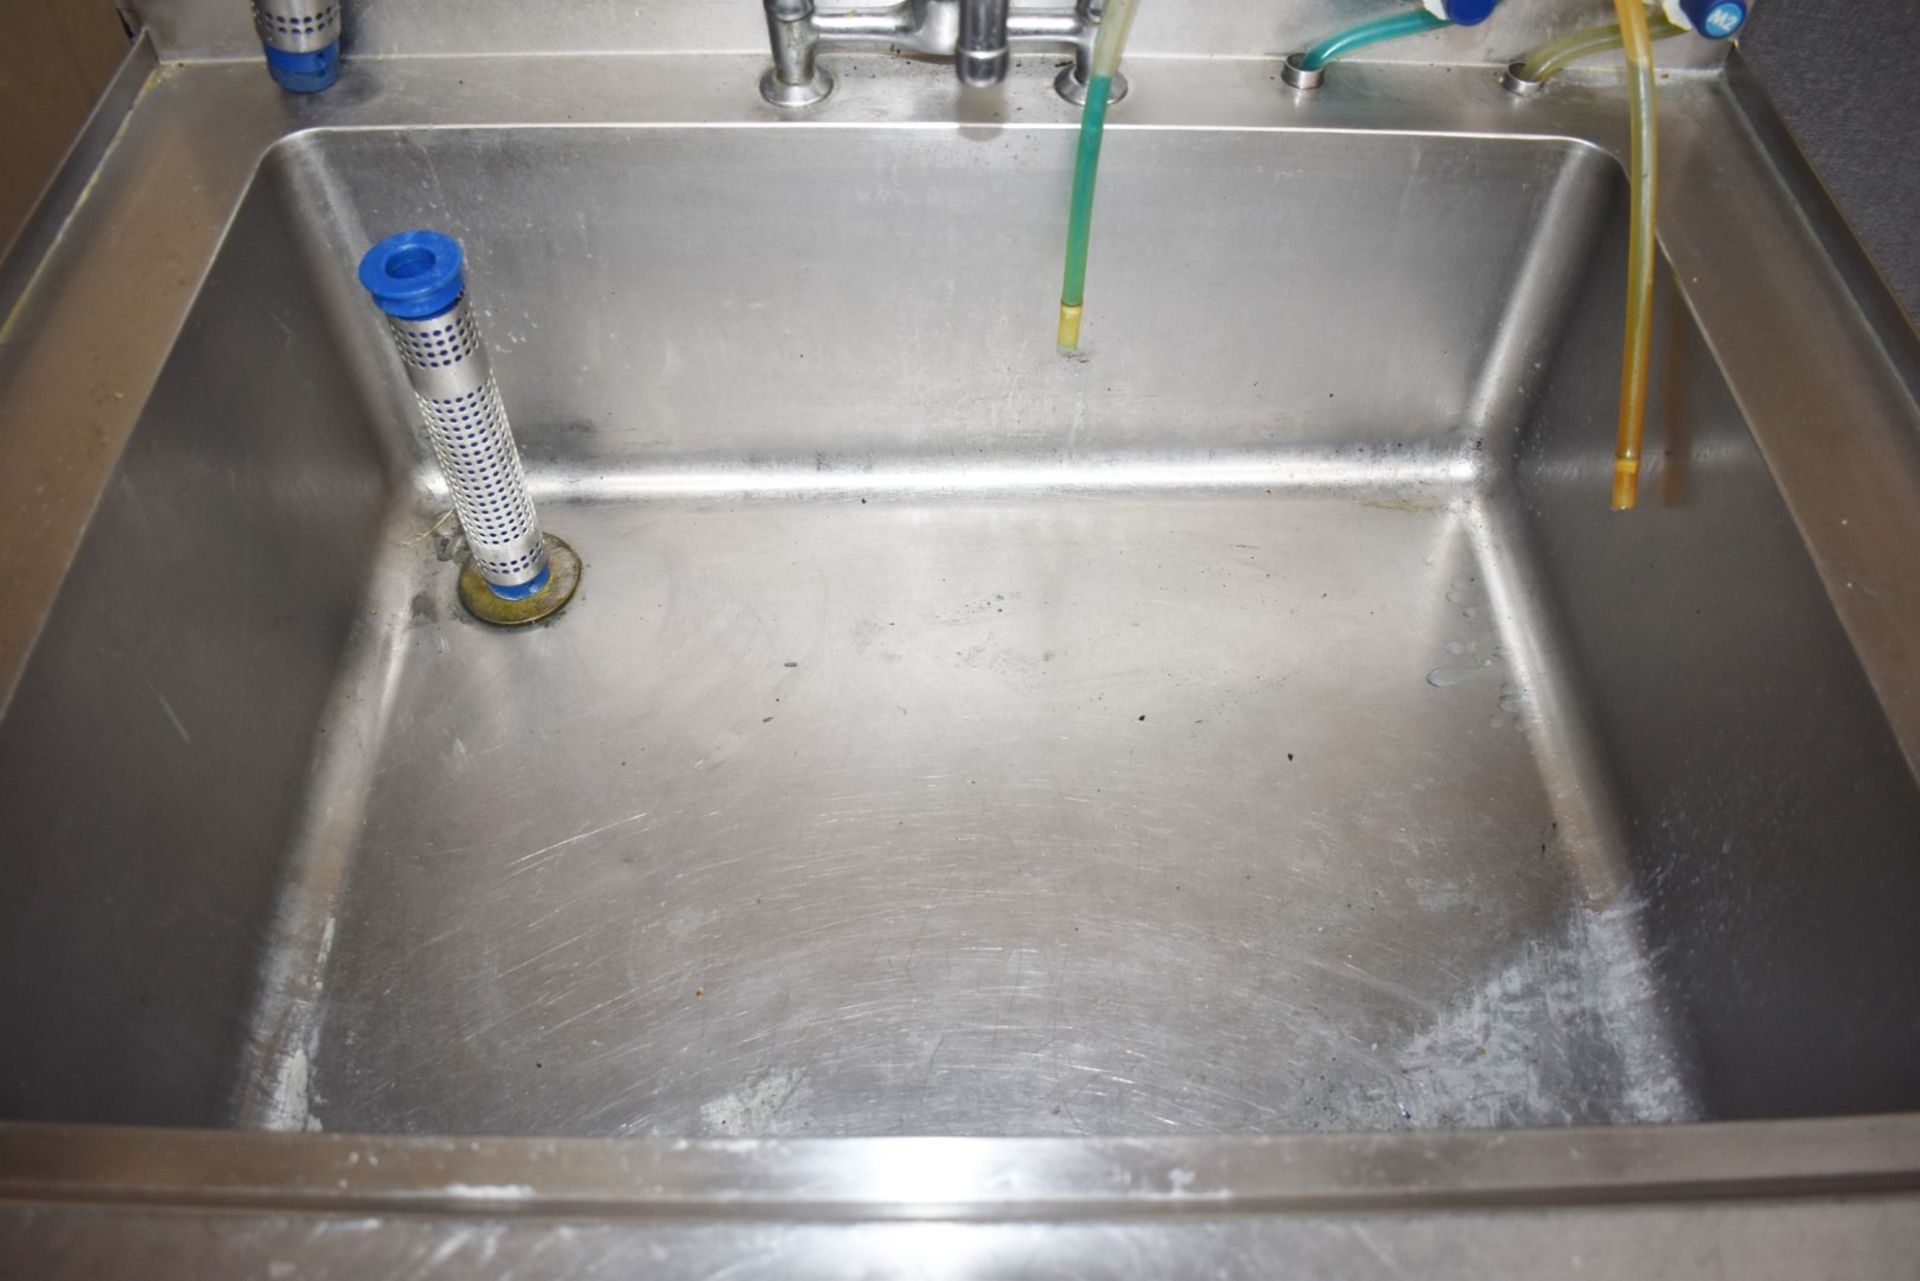 1 x Stainless Steel Commercial Wash Basin With Large Basin, Mixer Tap, Detergent Dispensers and Over - Image 8 of 9